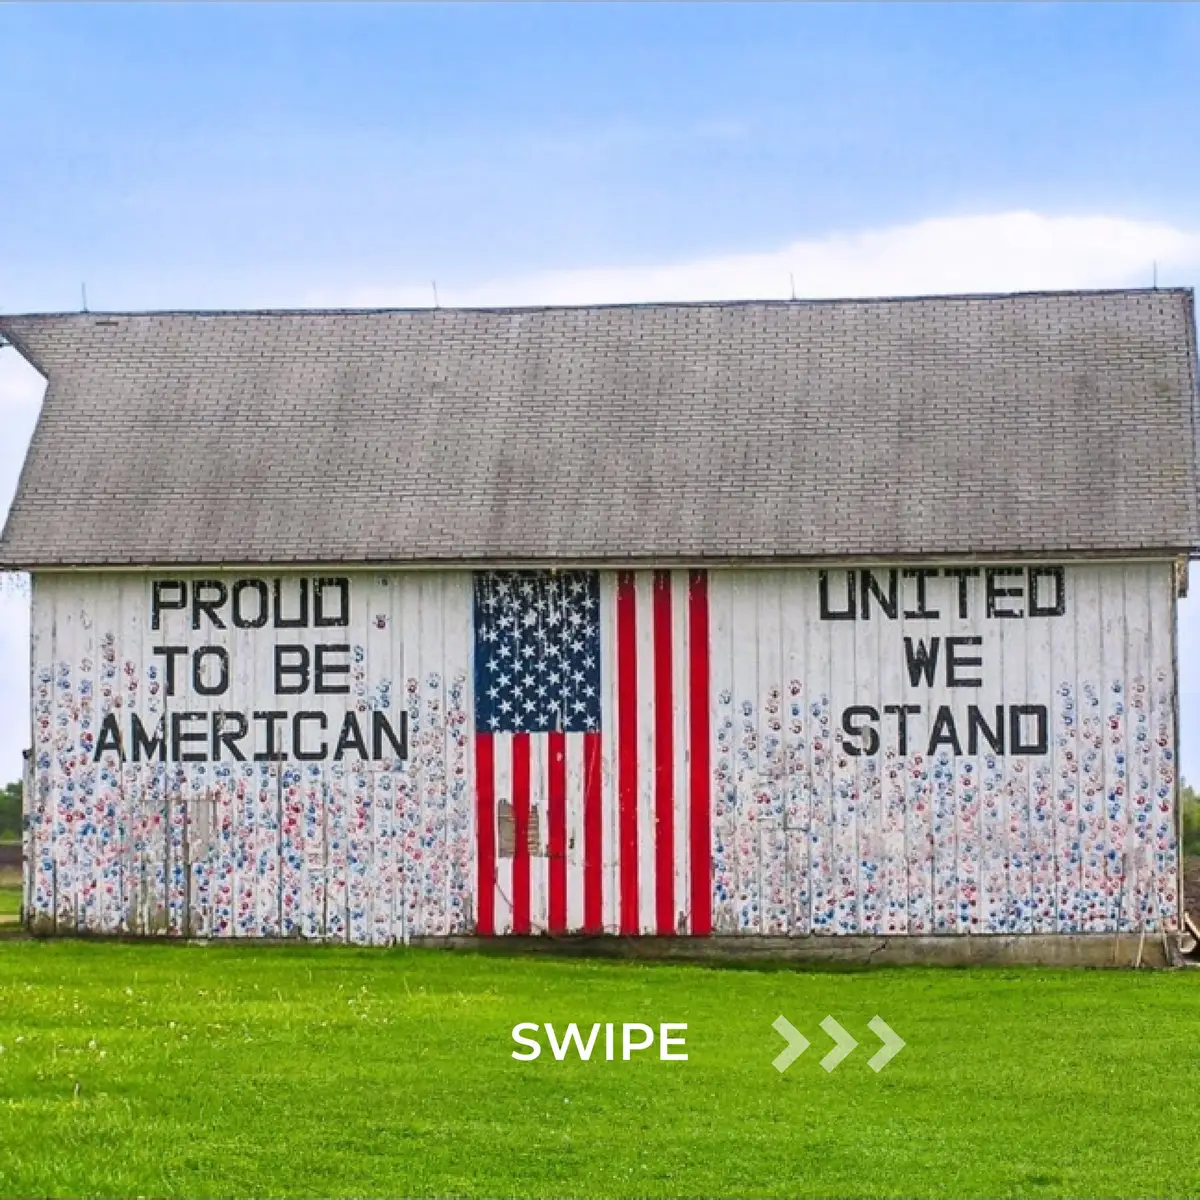 This old barn, That is weathered & worn. Has been given new life, From the American Flag it does adorn. The message boldly painted, On the side for all to see. Is a powerful reminder, Of what it takes to be free. There is a direct correlation with peace, And respecting one another. As we honor our Independence, Let us not be remiss. We have a responsibility to future generations, That they may be at least as equally blessed. United We Stand, Divided We Fall. The direction We choose, Is up to us All. “Proud To Be American”, We boldly proclaim. If You’re a fellow American, We encourage You to do the same. Wishing You & Your Family A Blessed Independence Day. LANDIO LAND IS OPPORTUNITY #land #landio #hellolandio #landforsale #farm #ranch #farmlife #ranchlife #farming #ranching #farminglife #ranchinglife #farms #ranches 